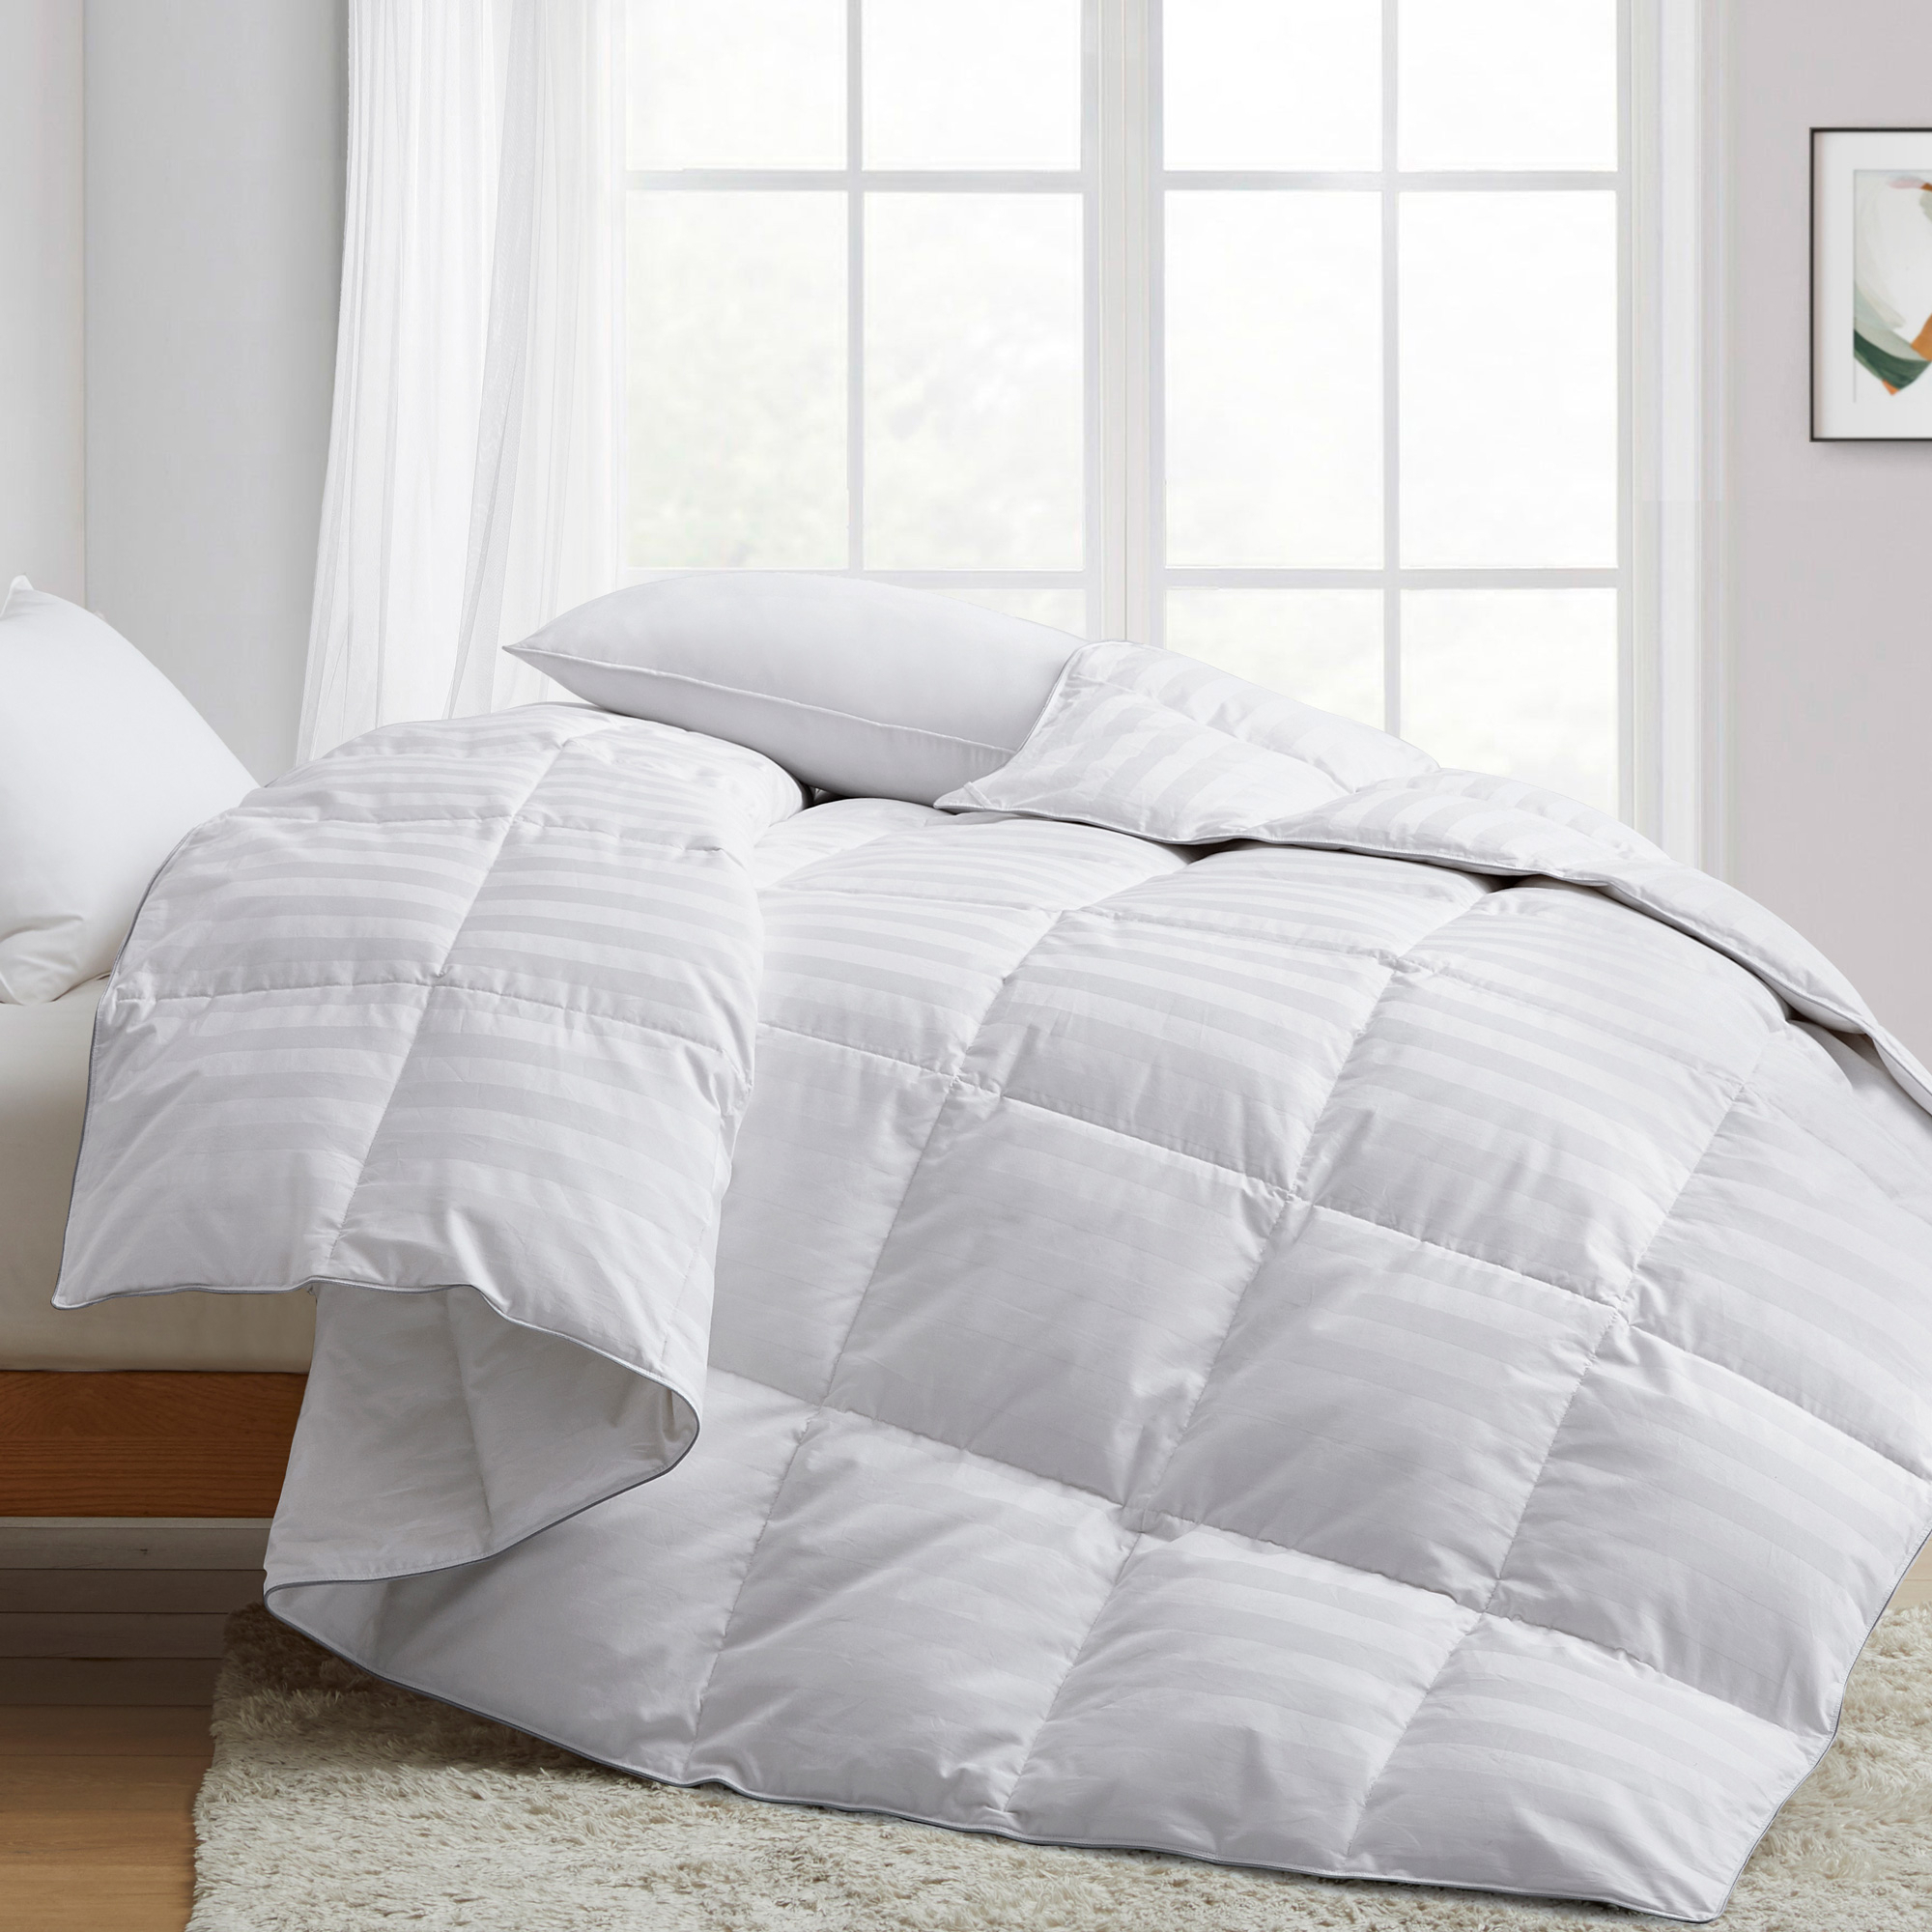 All Seasons Feather Fiber And Down Comforter Cotton Cover 500 TC - Full, White